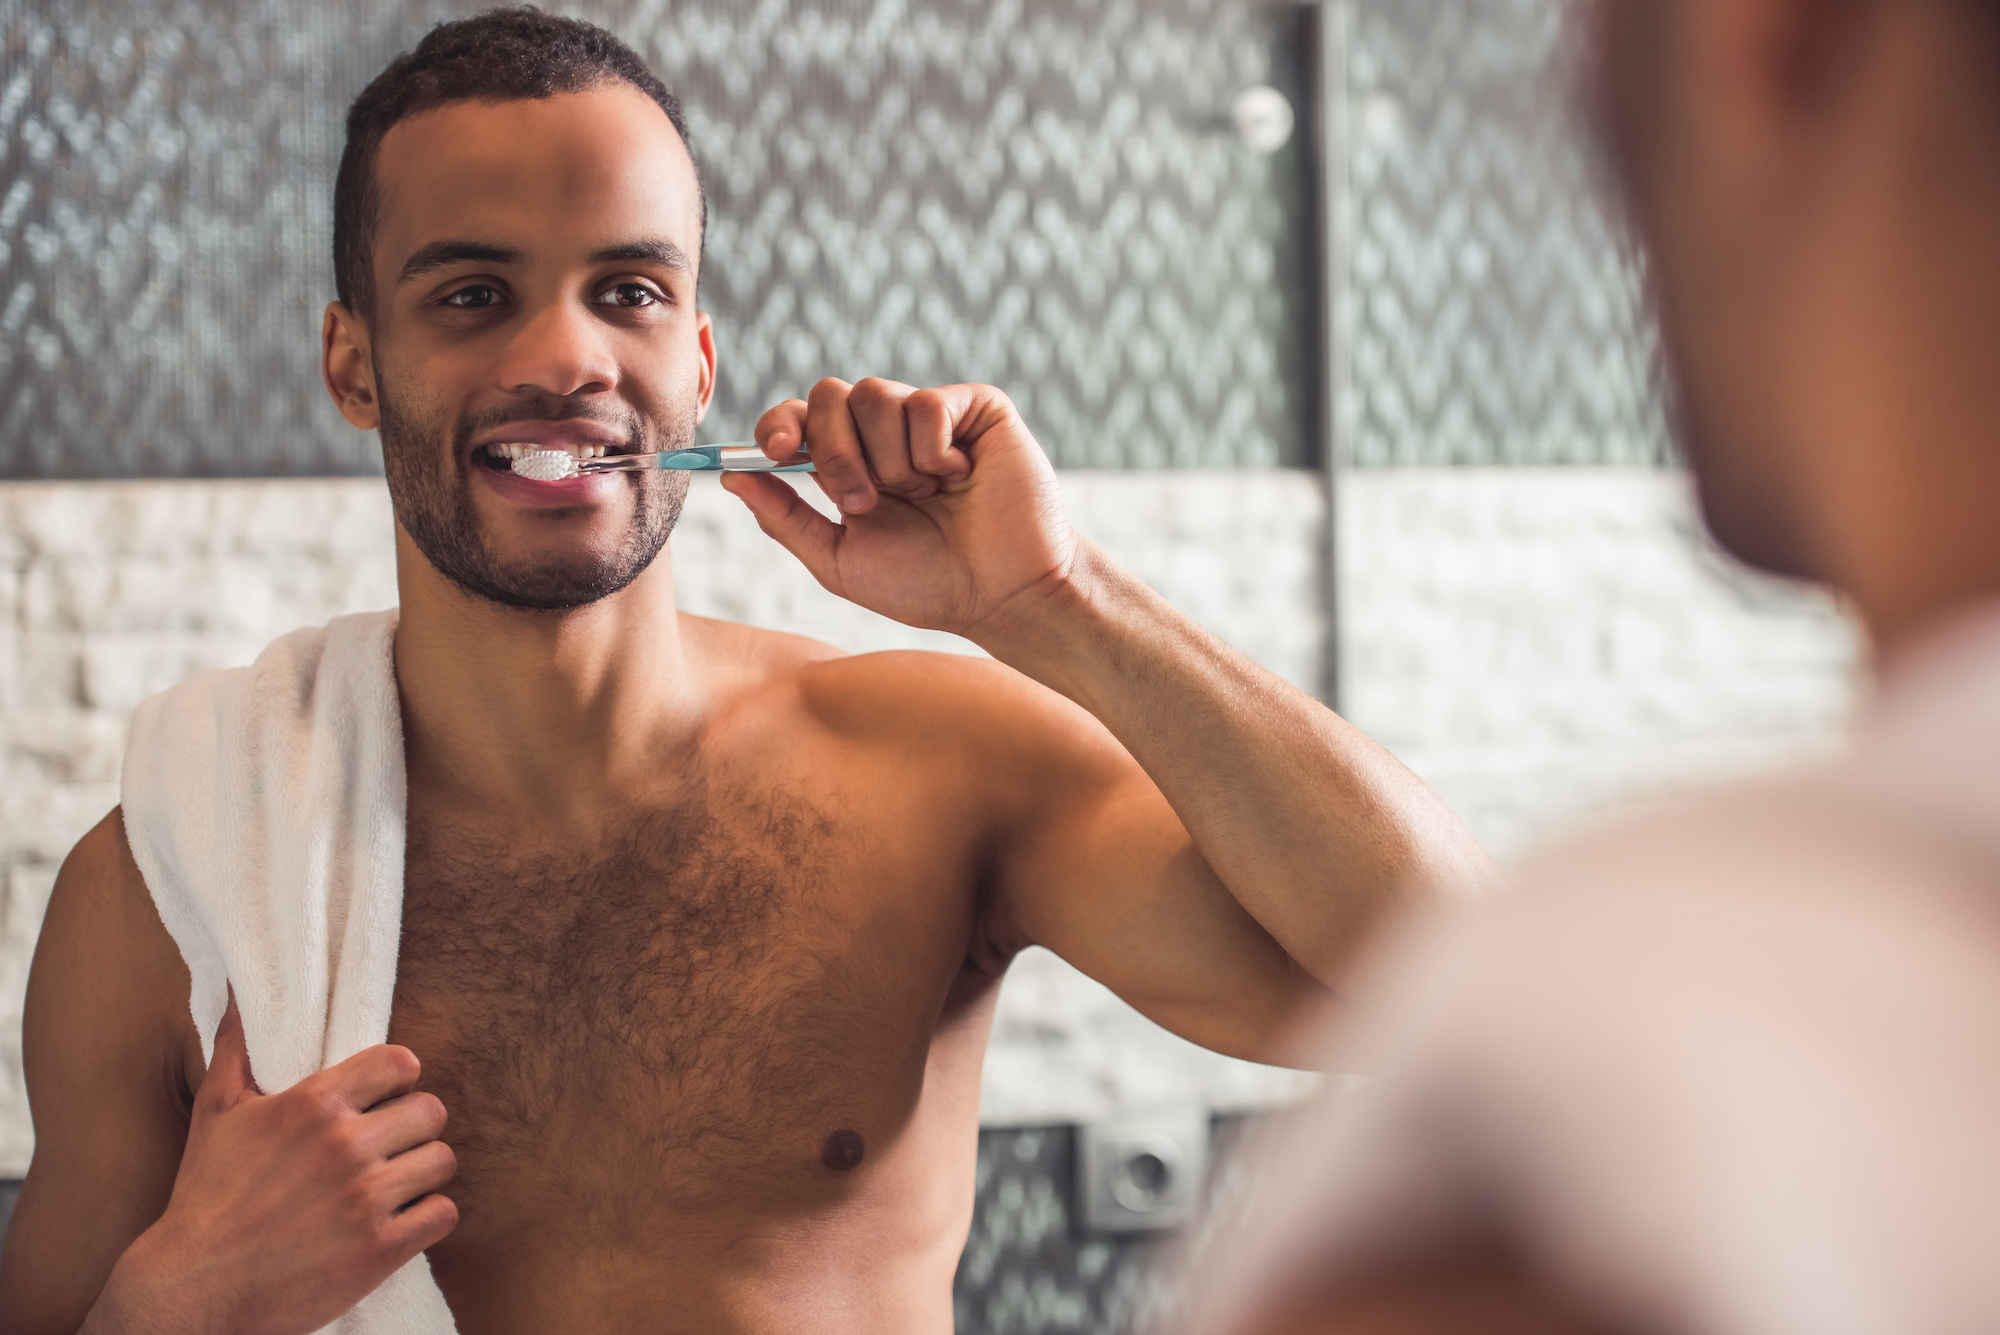 Electric Toothbrush: Benefits And Common Mistakes When Using One